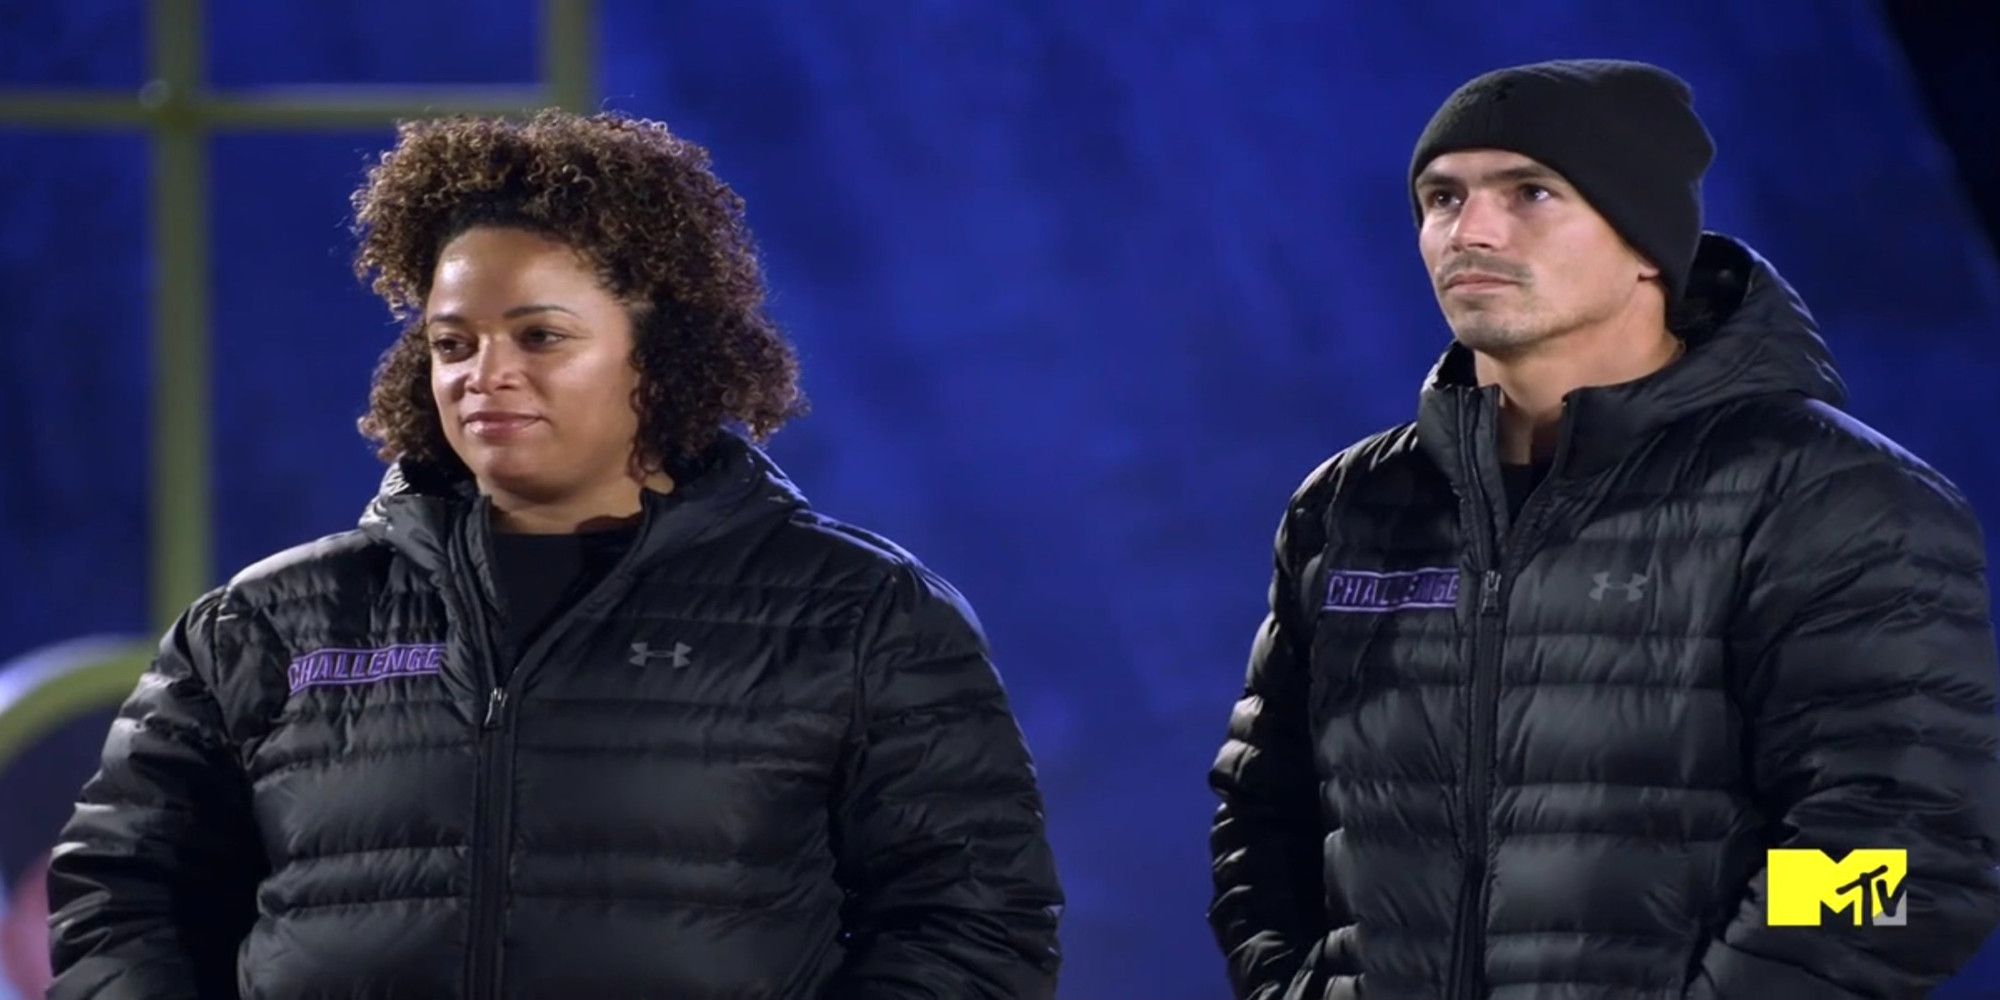 Jordan and Aneesa on The Challenge Ride or Dies wearing matching black puffer jackets with a serious expression